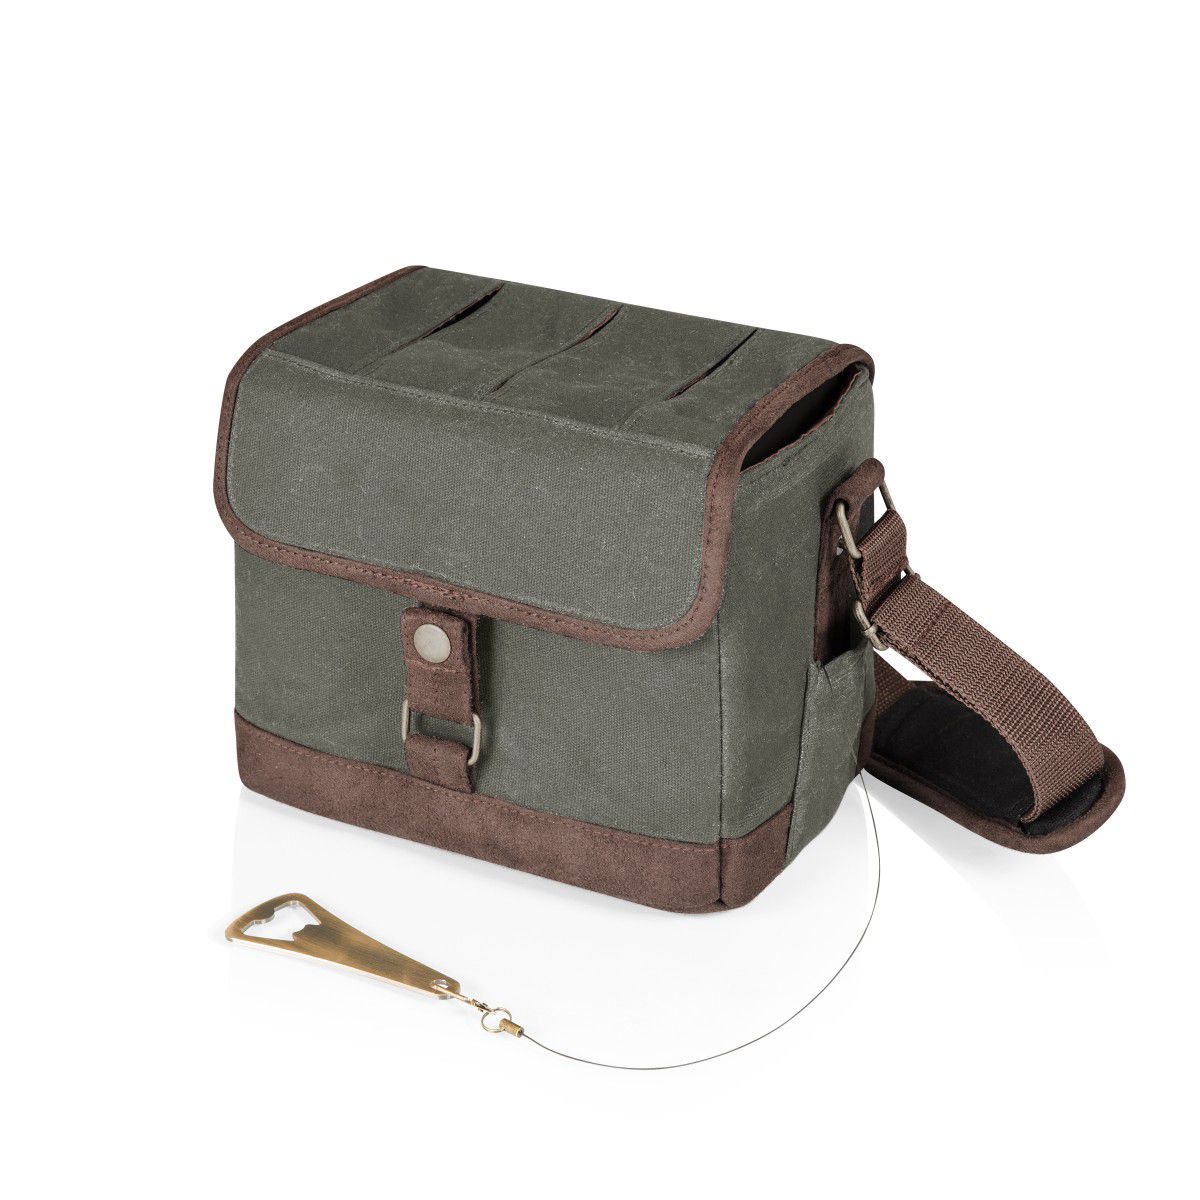 Beer Caddy Khaki Green and Brown Cooler Tote with Opener by Legacy